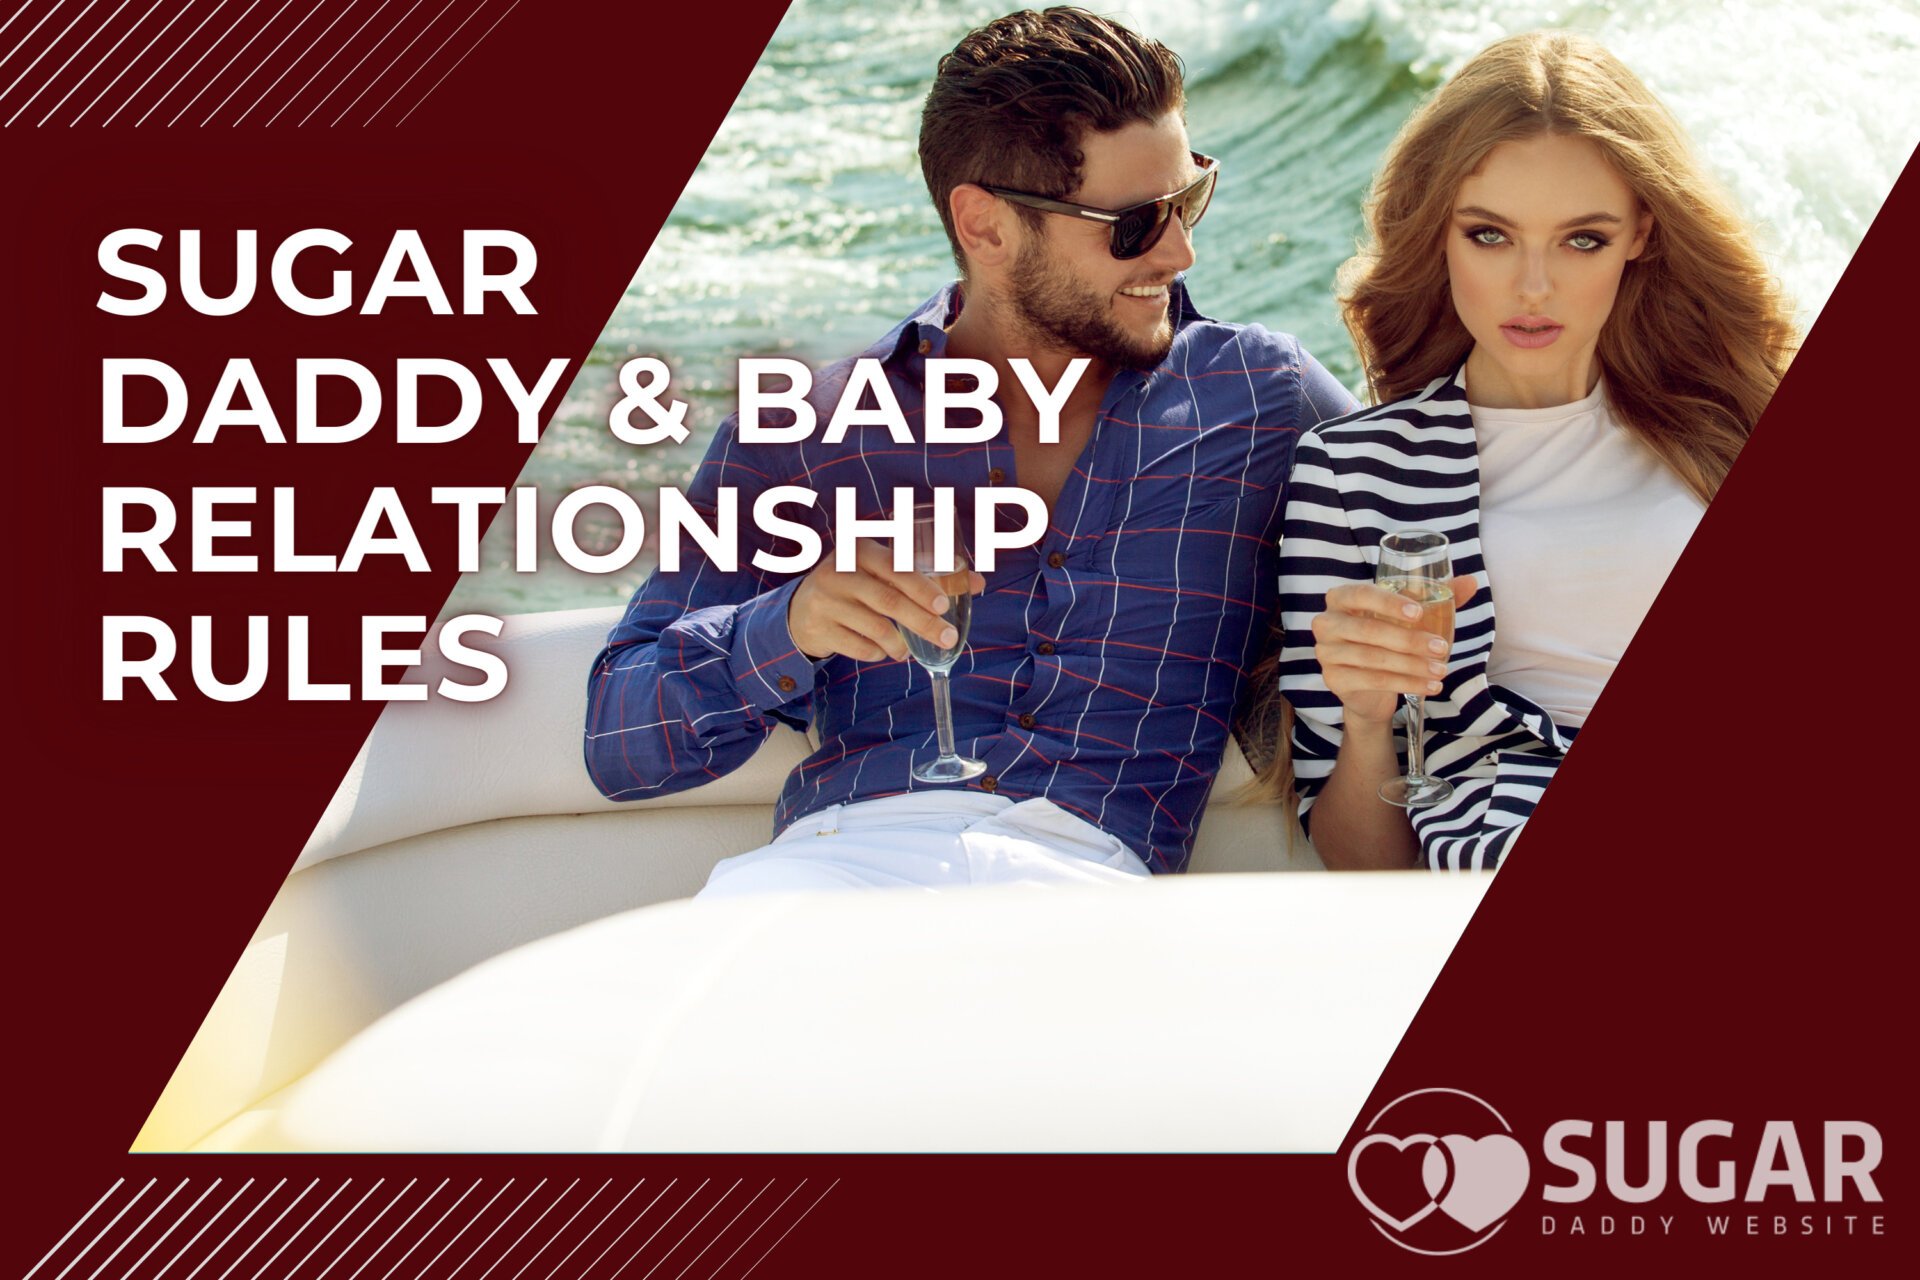 10 Sugar Daddy & Baby Rules of Relationships Need-To-Know